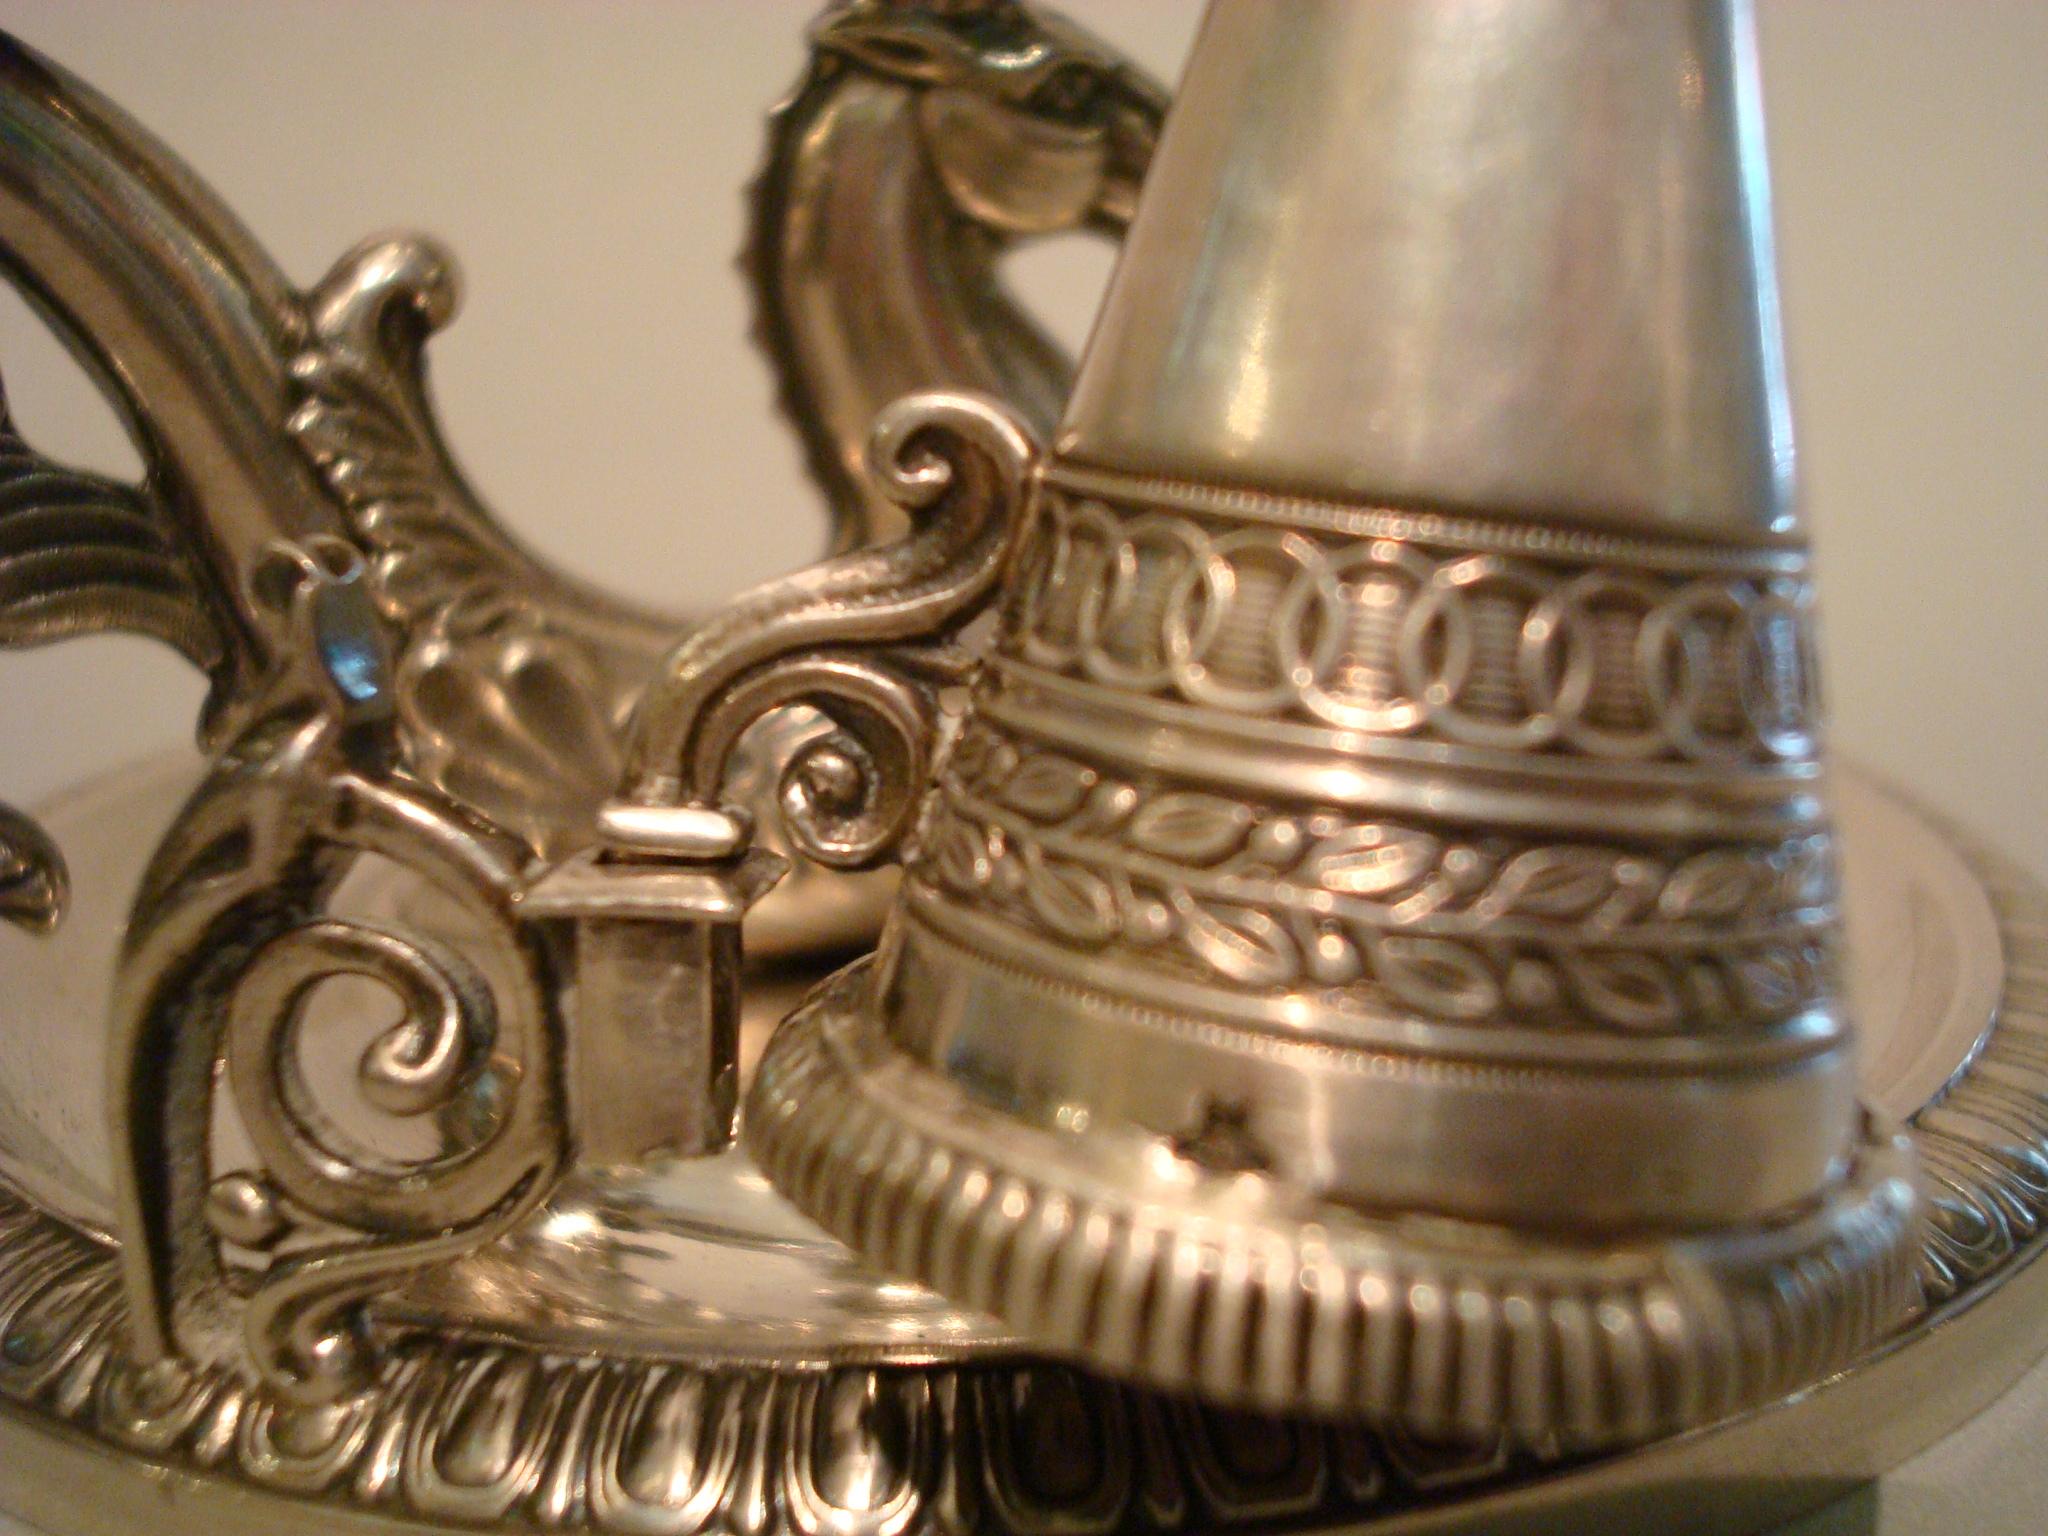 Mid-19th Century Silver Chamberstick / Candleholder Hippocampus / Seahorse, 1837 Munich, Germany For Sale